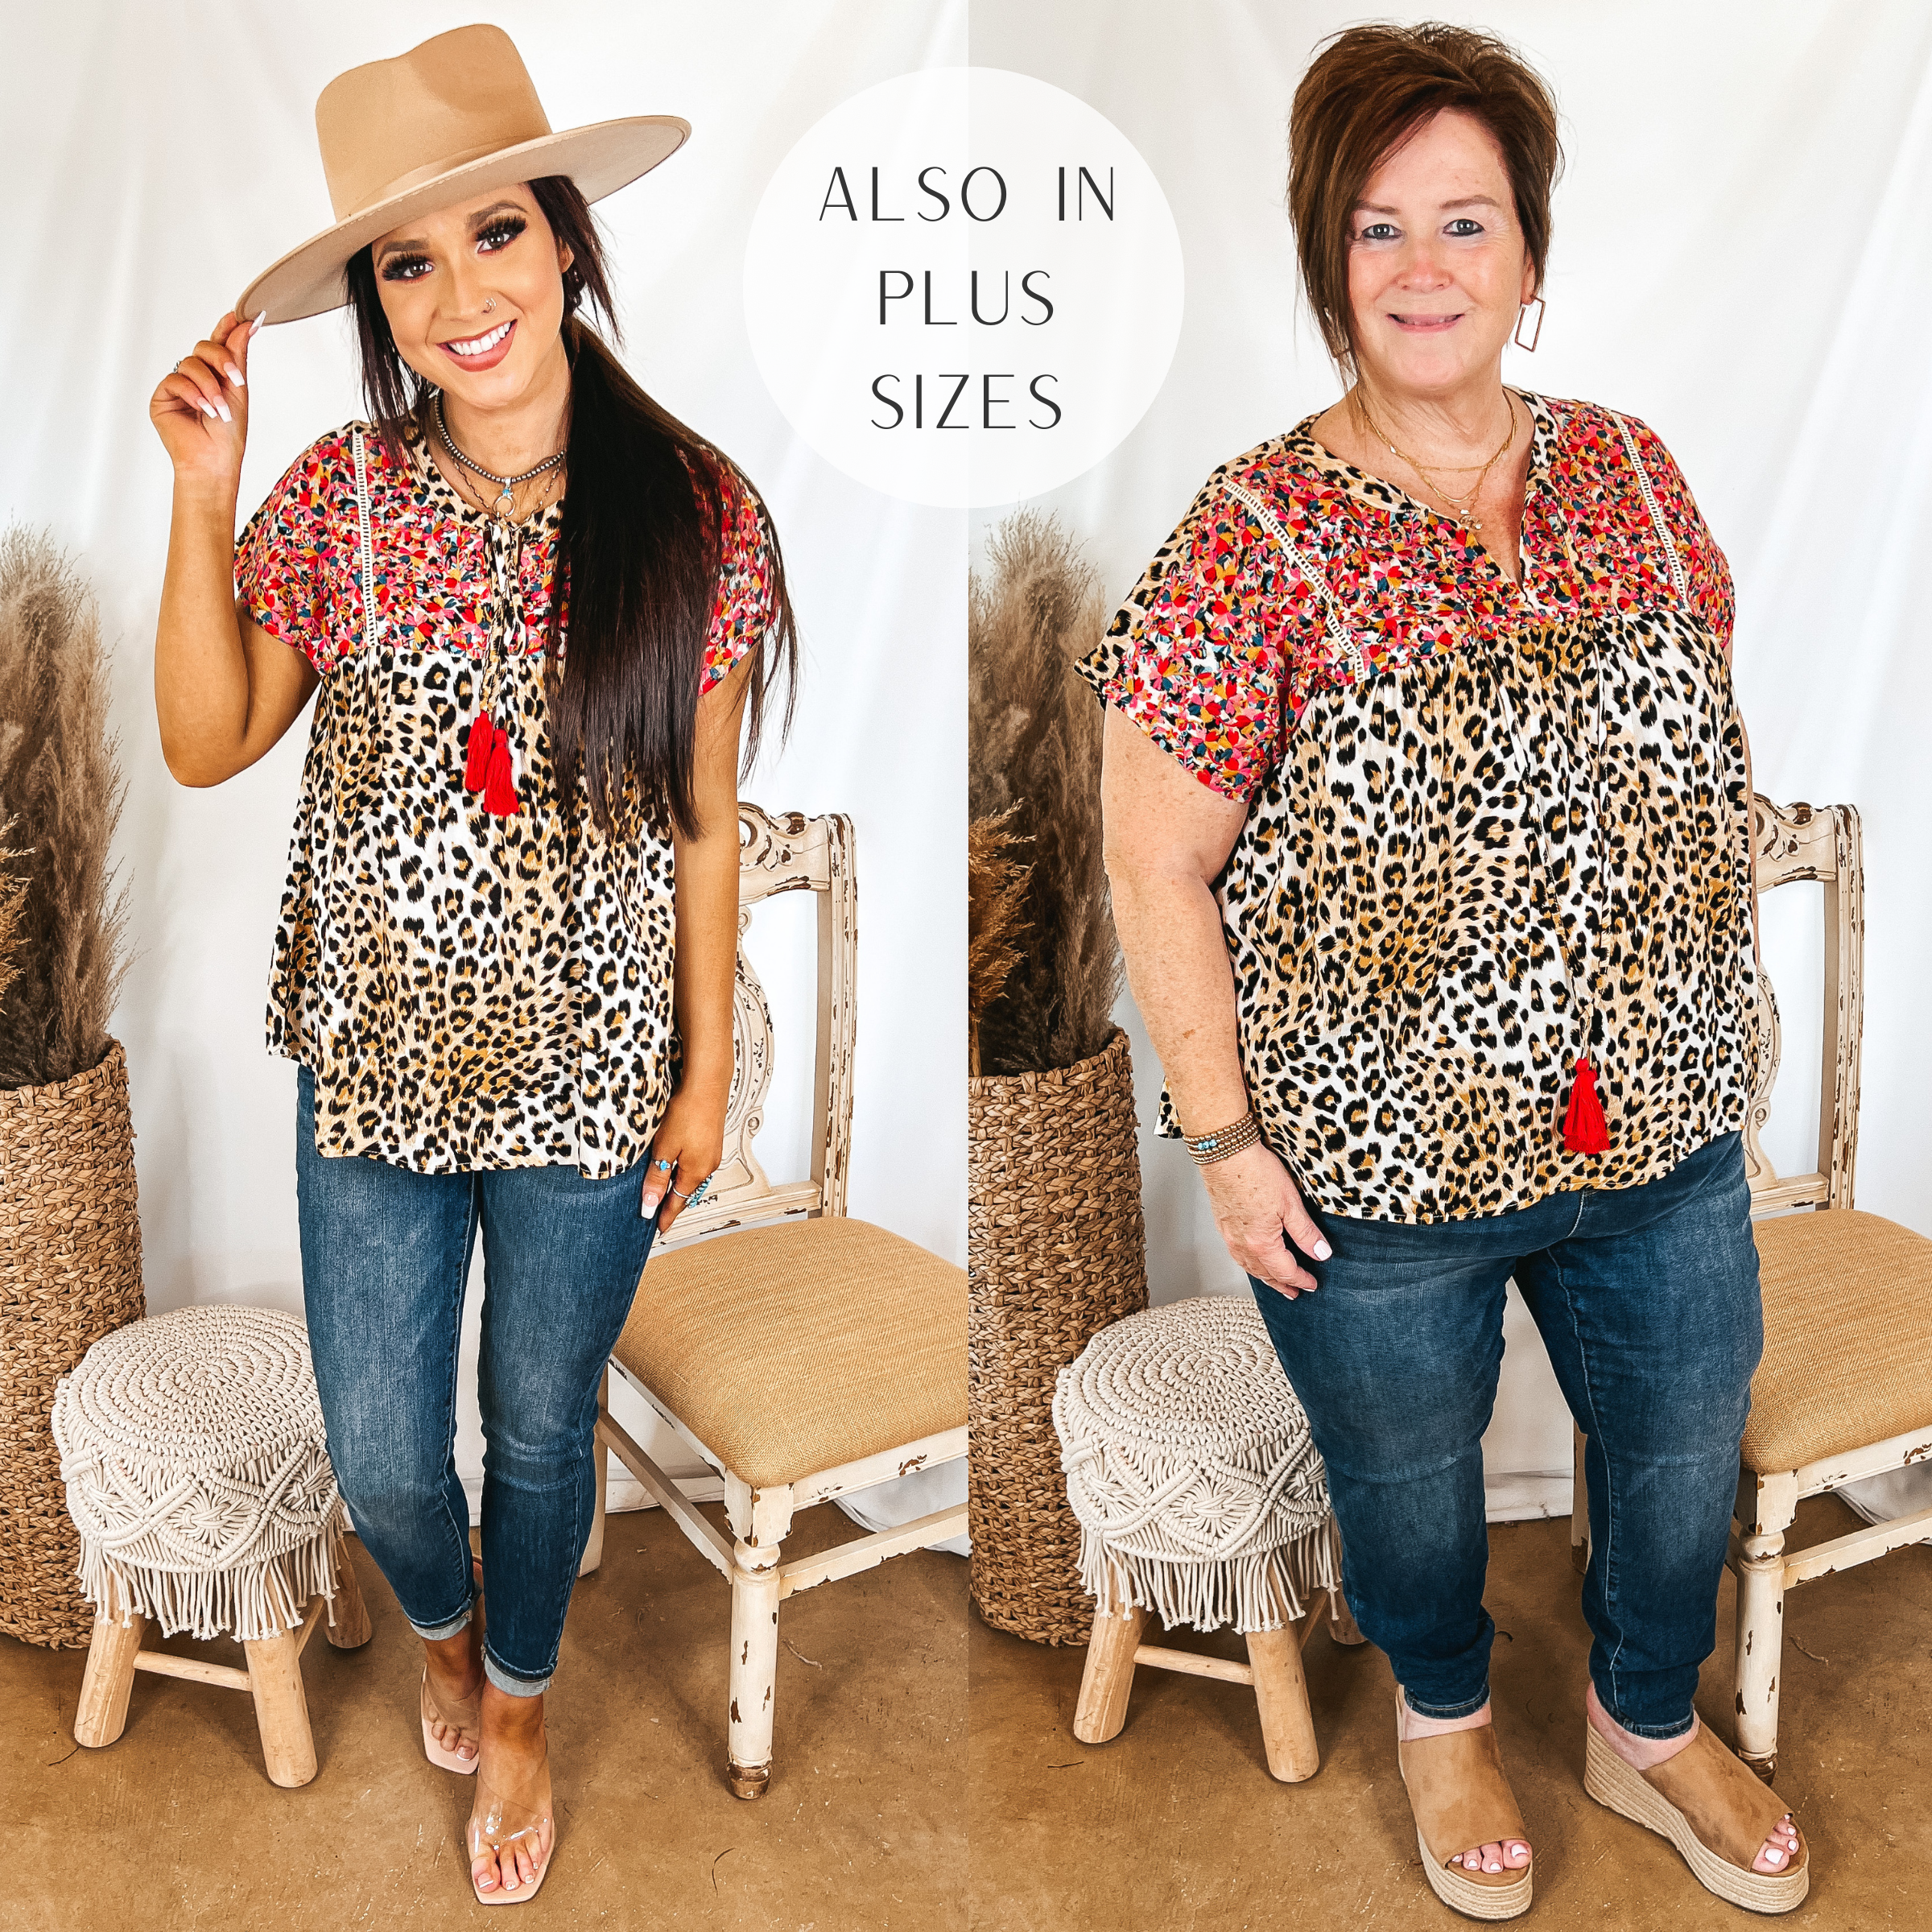 Models are wearing a leopard print top that has floral embroidery and a front tie keyhole. Size small model ahs it paired with a tan hat, dark wash skinnies, and clear heels. Plus size model has it paired with brown wedges, dark wash skinnies, and gold jewelry.